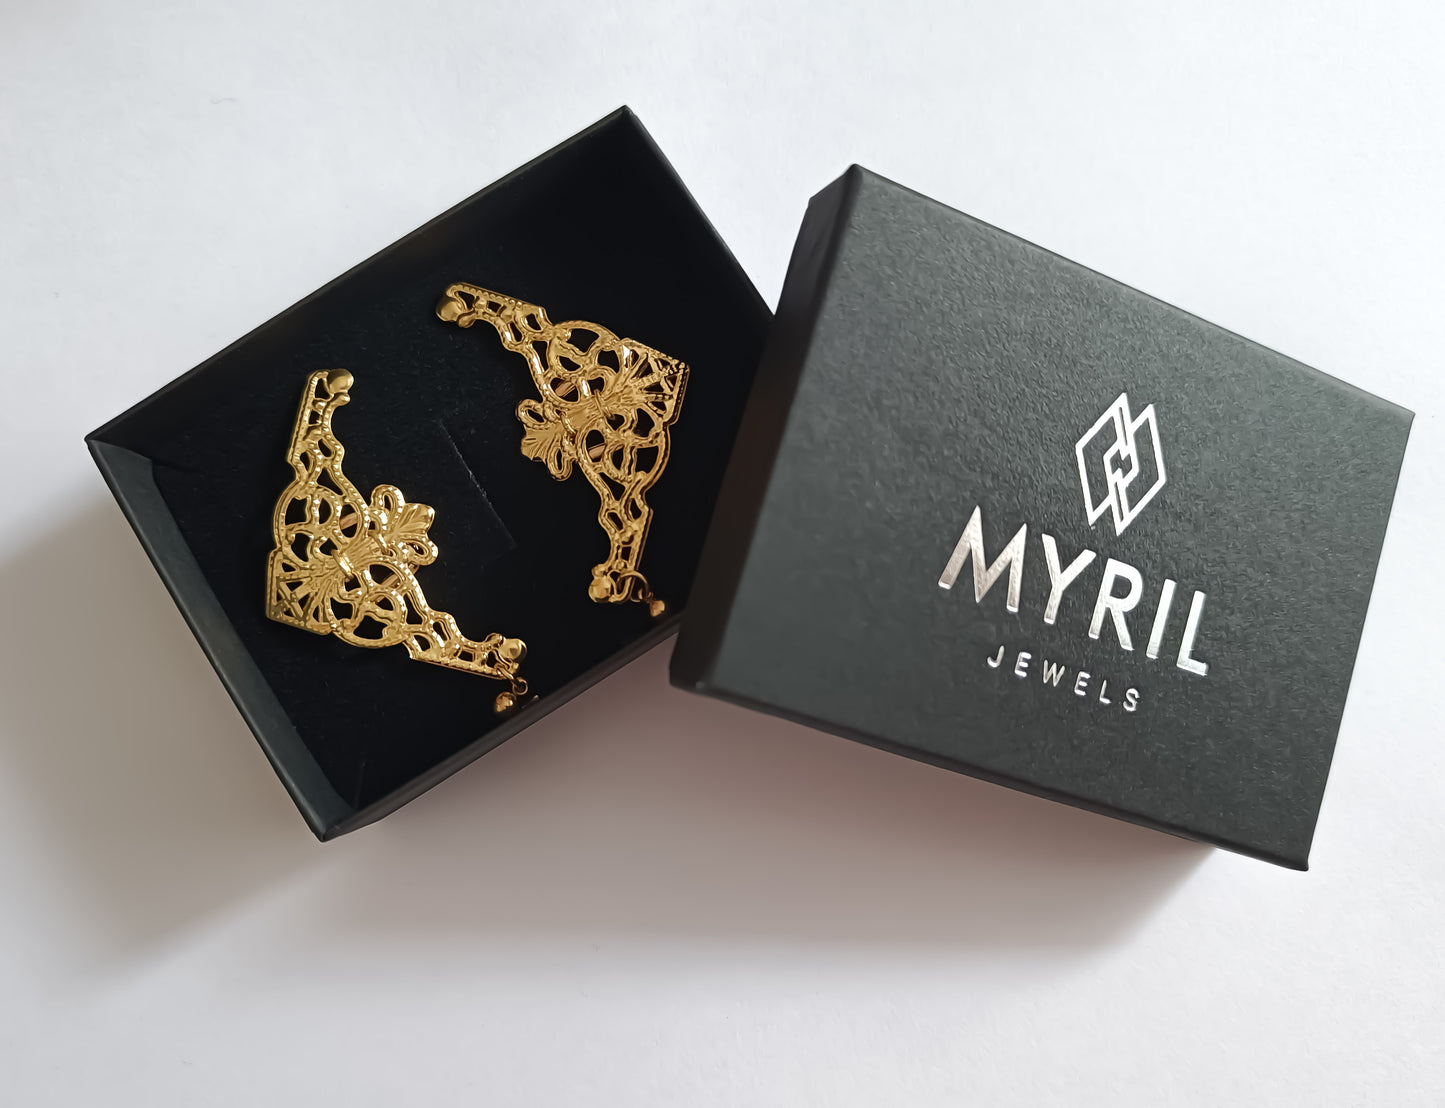 nside a sleek black Myril Jewels box lies a pair of exquisite gold cuff earrings, showcasing the intricate craftsmanship synonymous with the neo-goth brand. These ornate pieces, with their elaborate filigree design, exude a dark-avantgarde elegance, perfect for anyone who embraces gothic-chic or whimsigoth style. Ideal for adding a touch of witchcore to everyday wear or as a standout accessory for rave parties and festivals